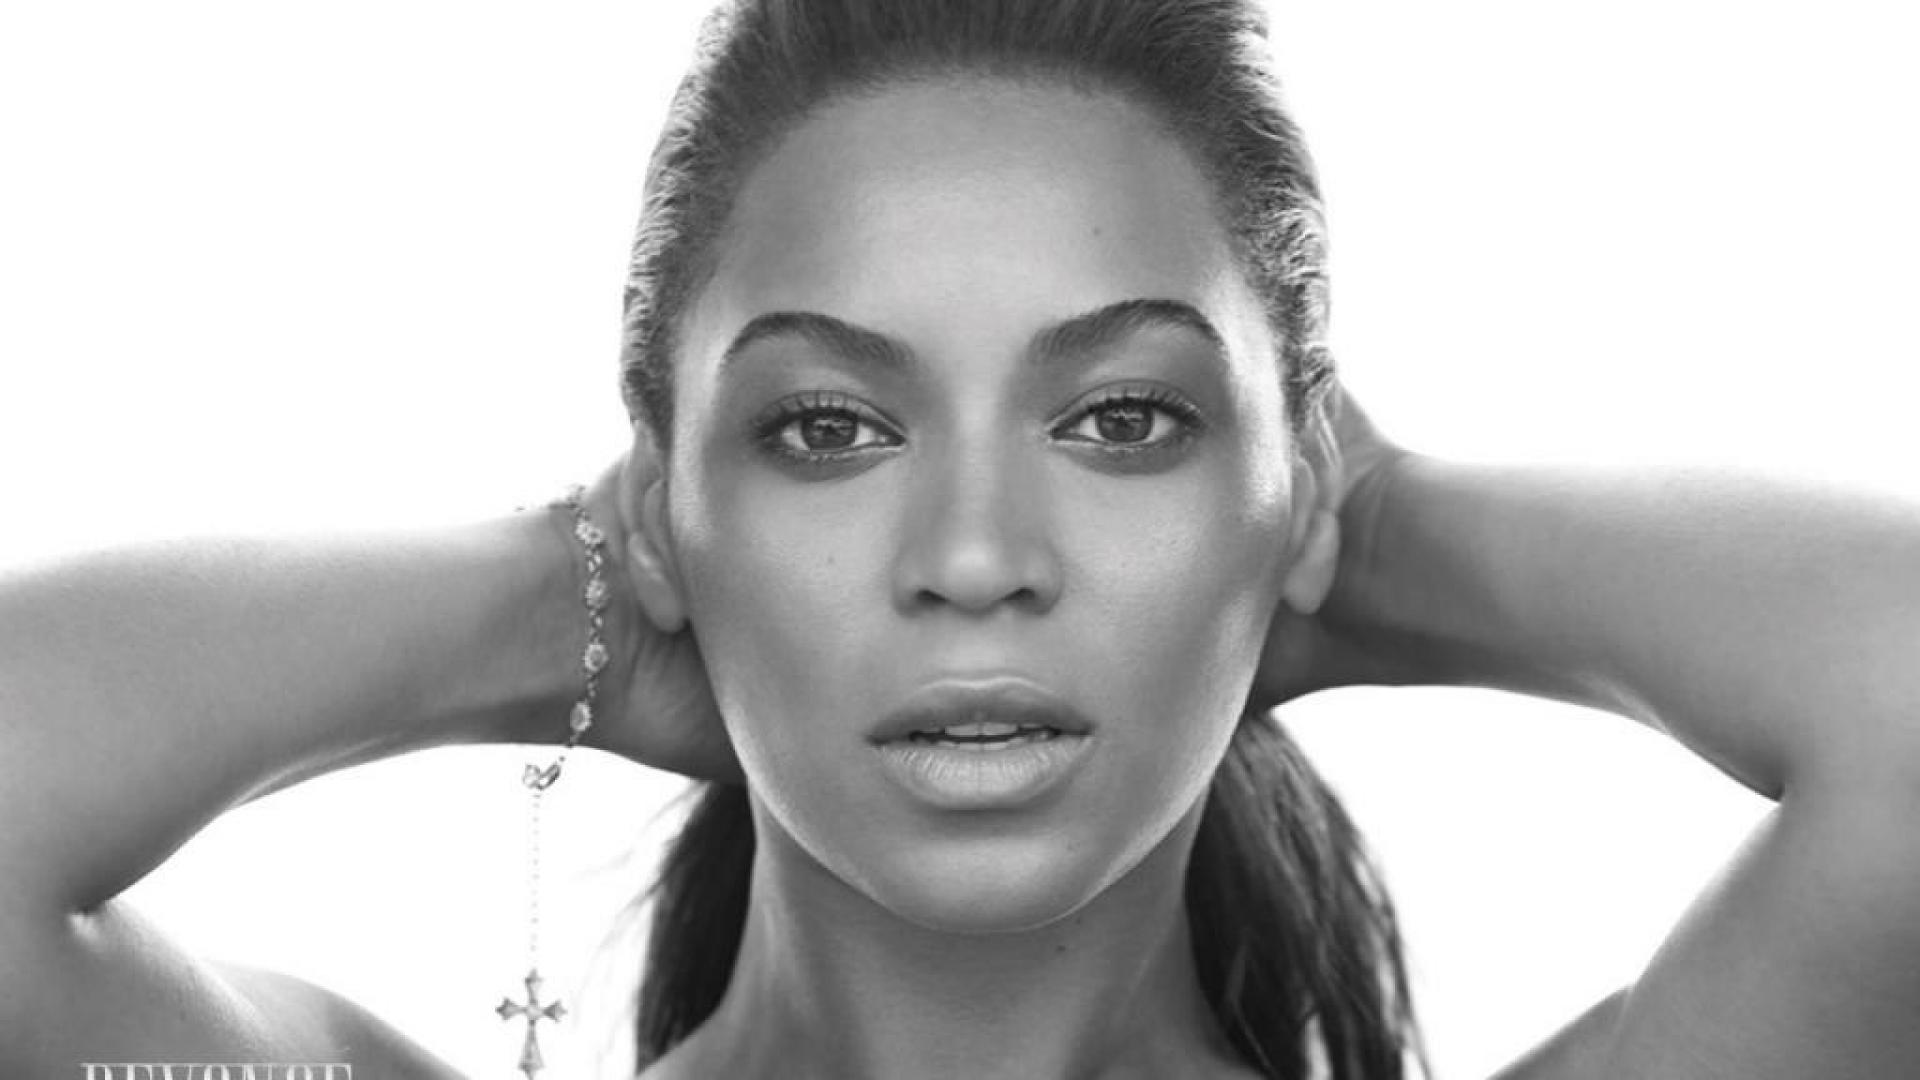 Image for gt beyonce iphone wallpaper, Pin beyonce